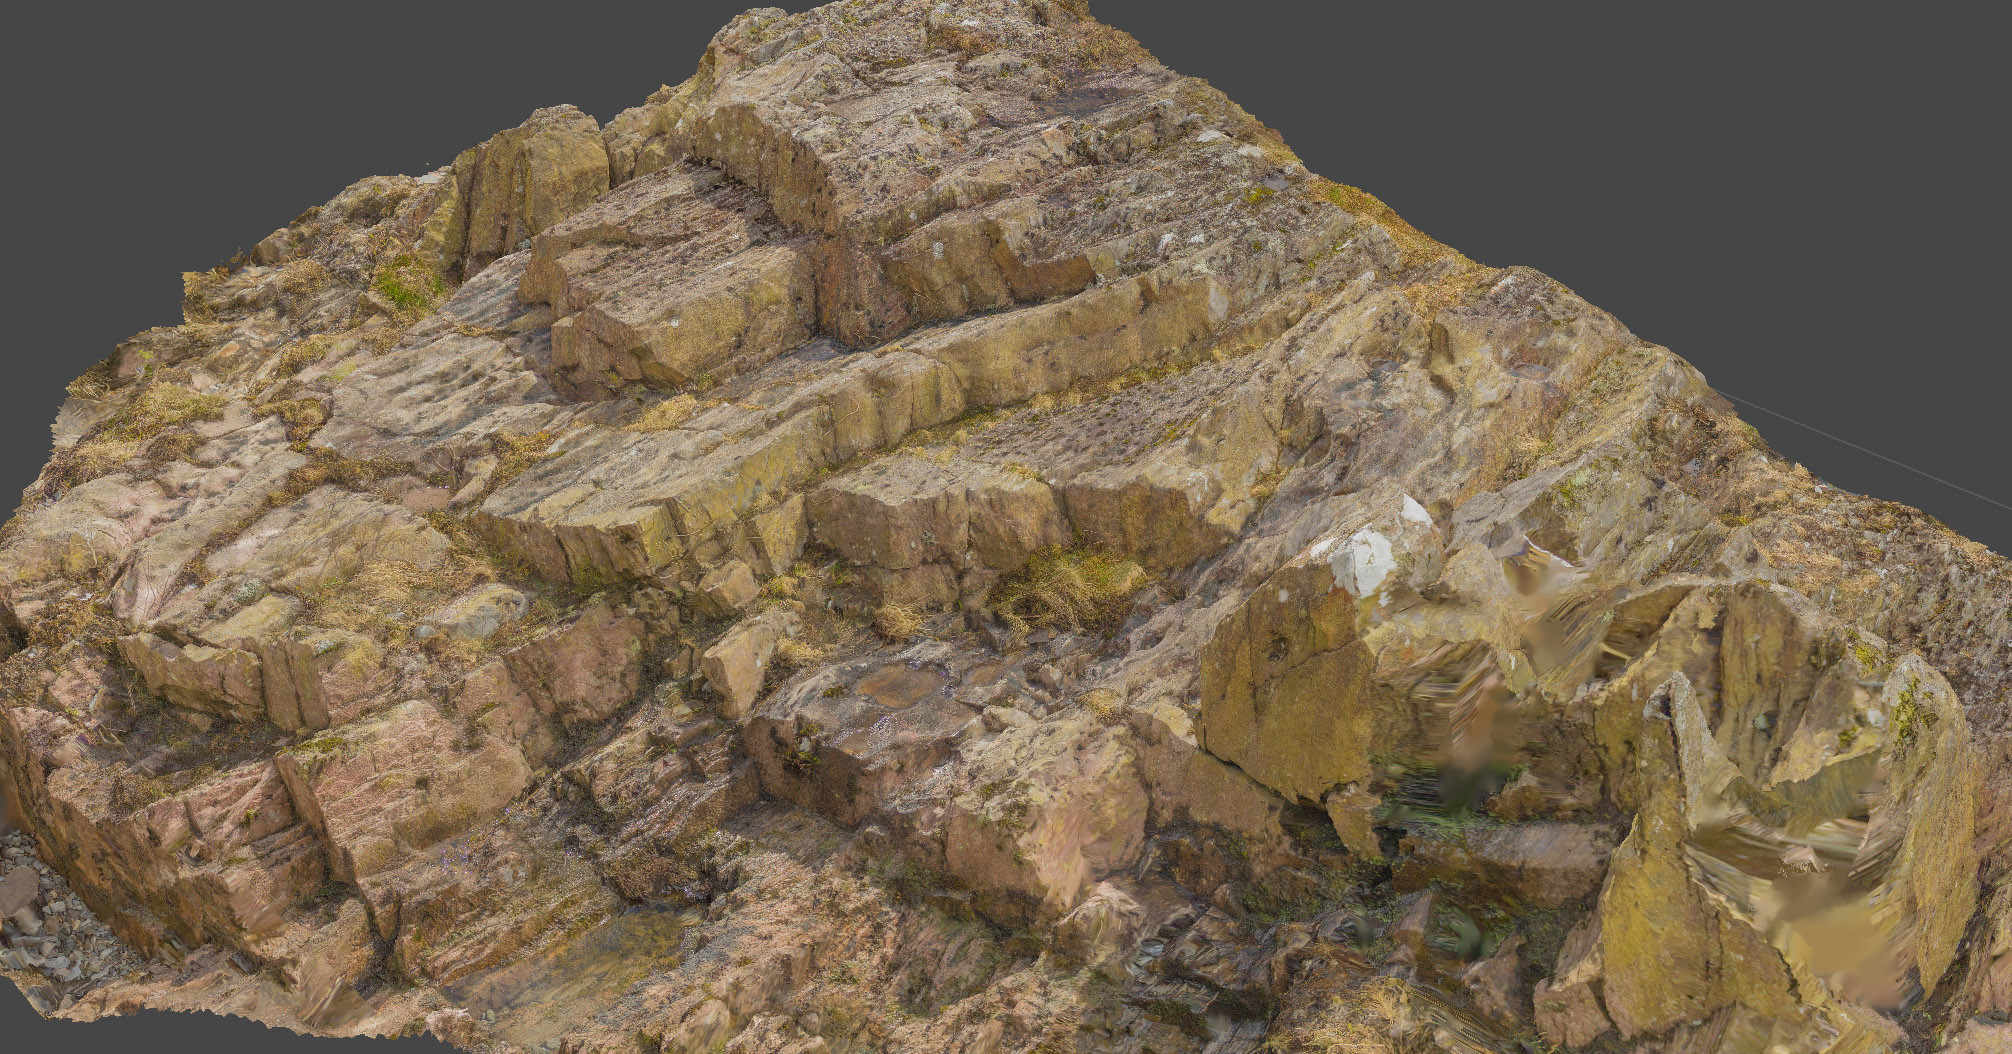 The raw 3D scan used for one of the rock assets in Photoscan/Metashape.